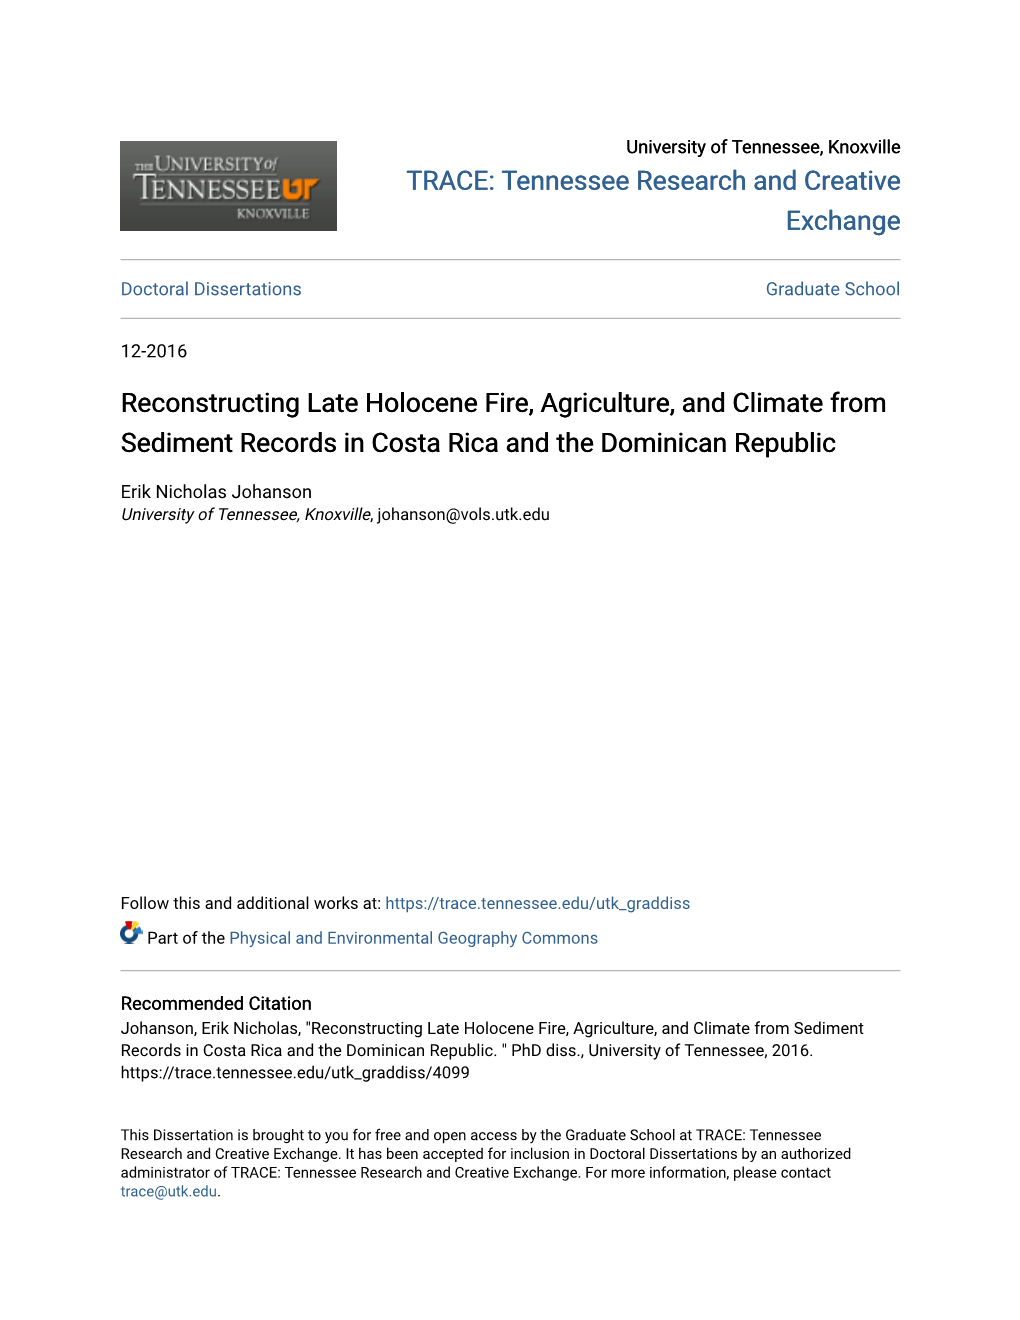 Reconstructing Late Holocene Fire, Agriculture, and Climate from Sediment Records in Costa Rica and the Dominican Republic